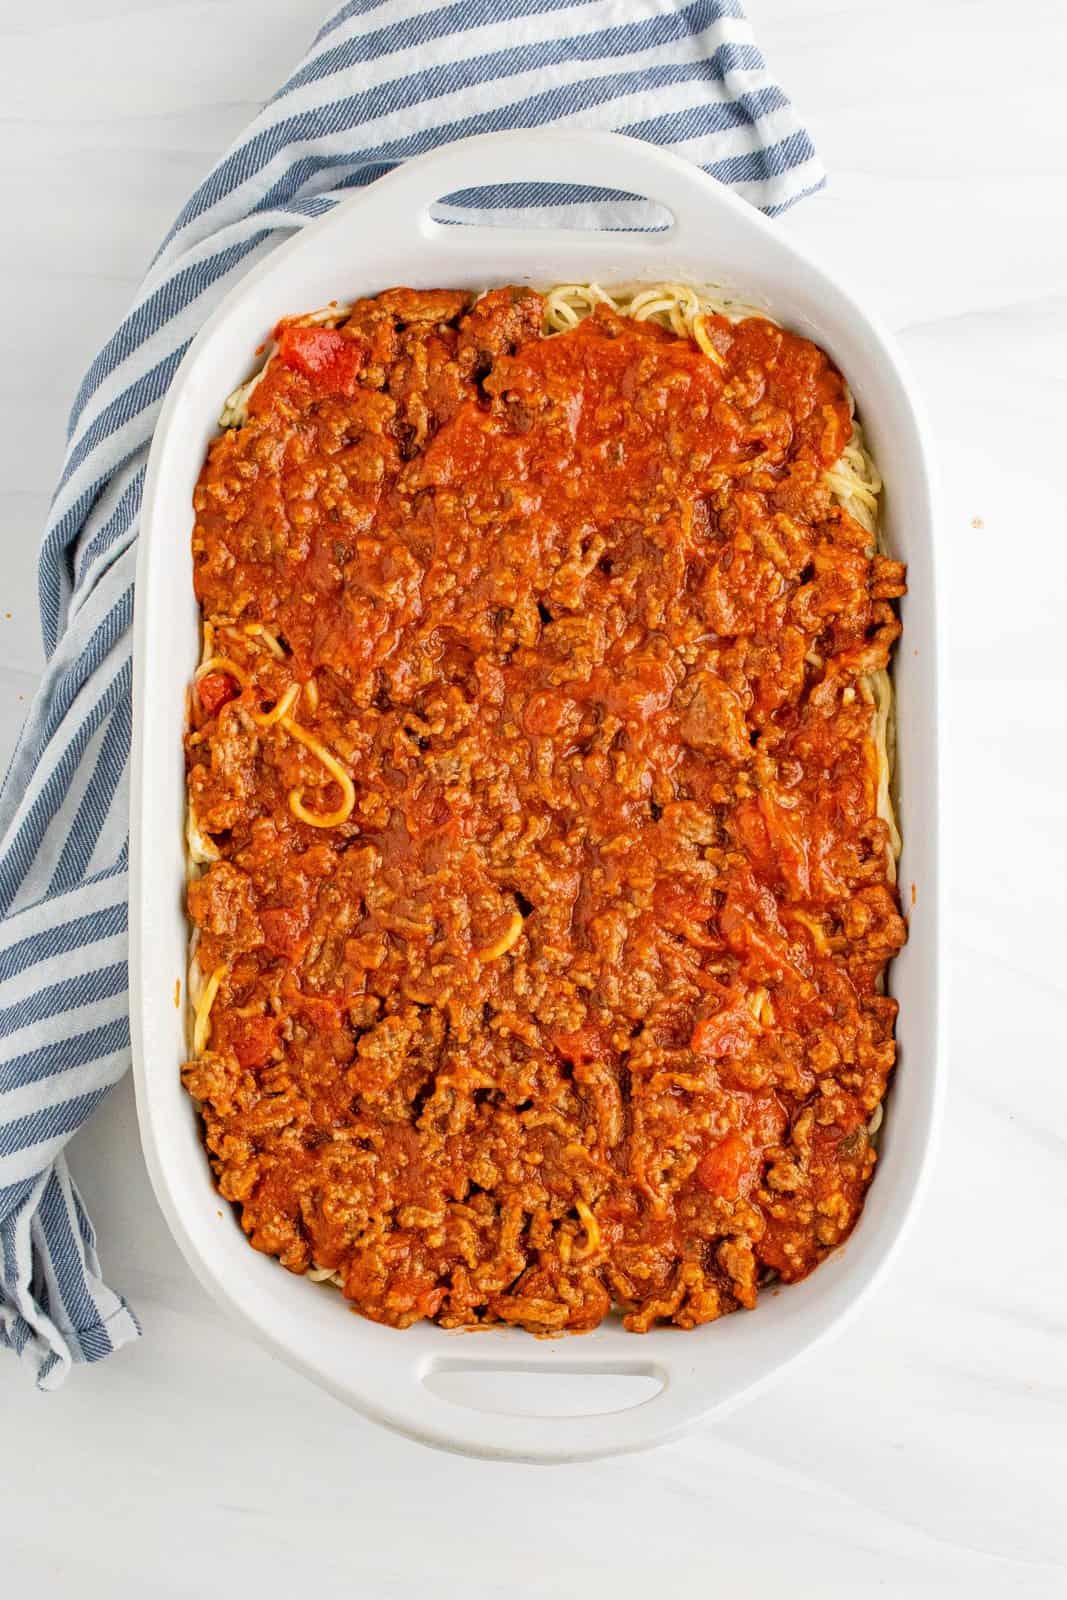 meat sauce spread on top of Alfredo noodles in baking dish.